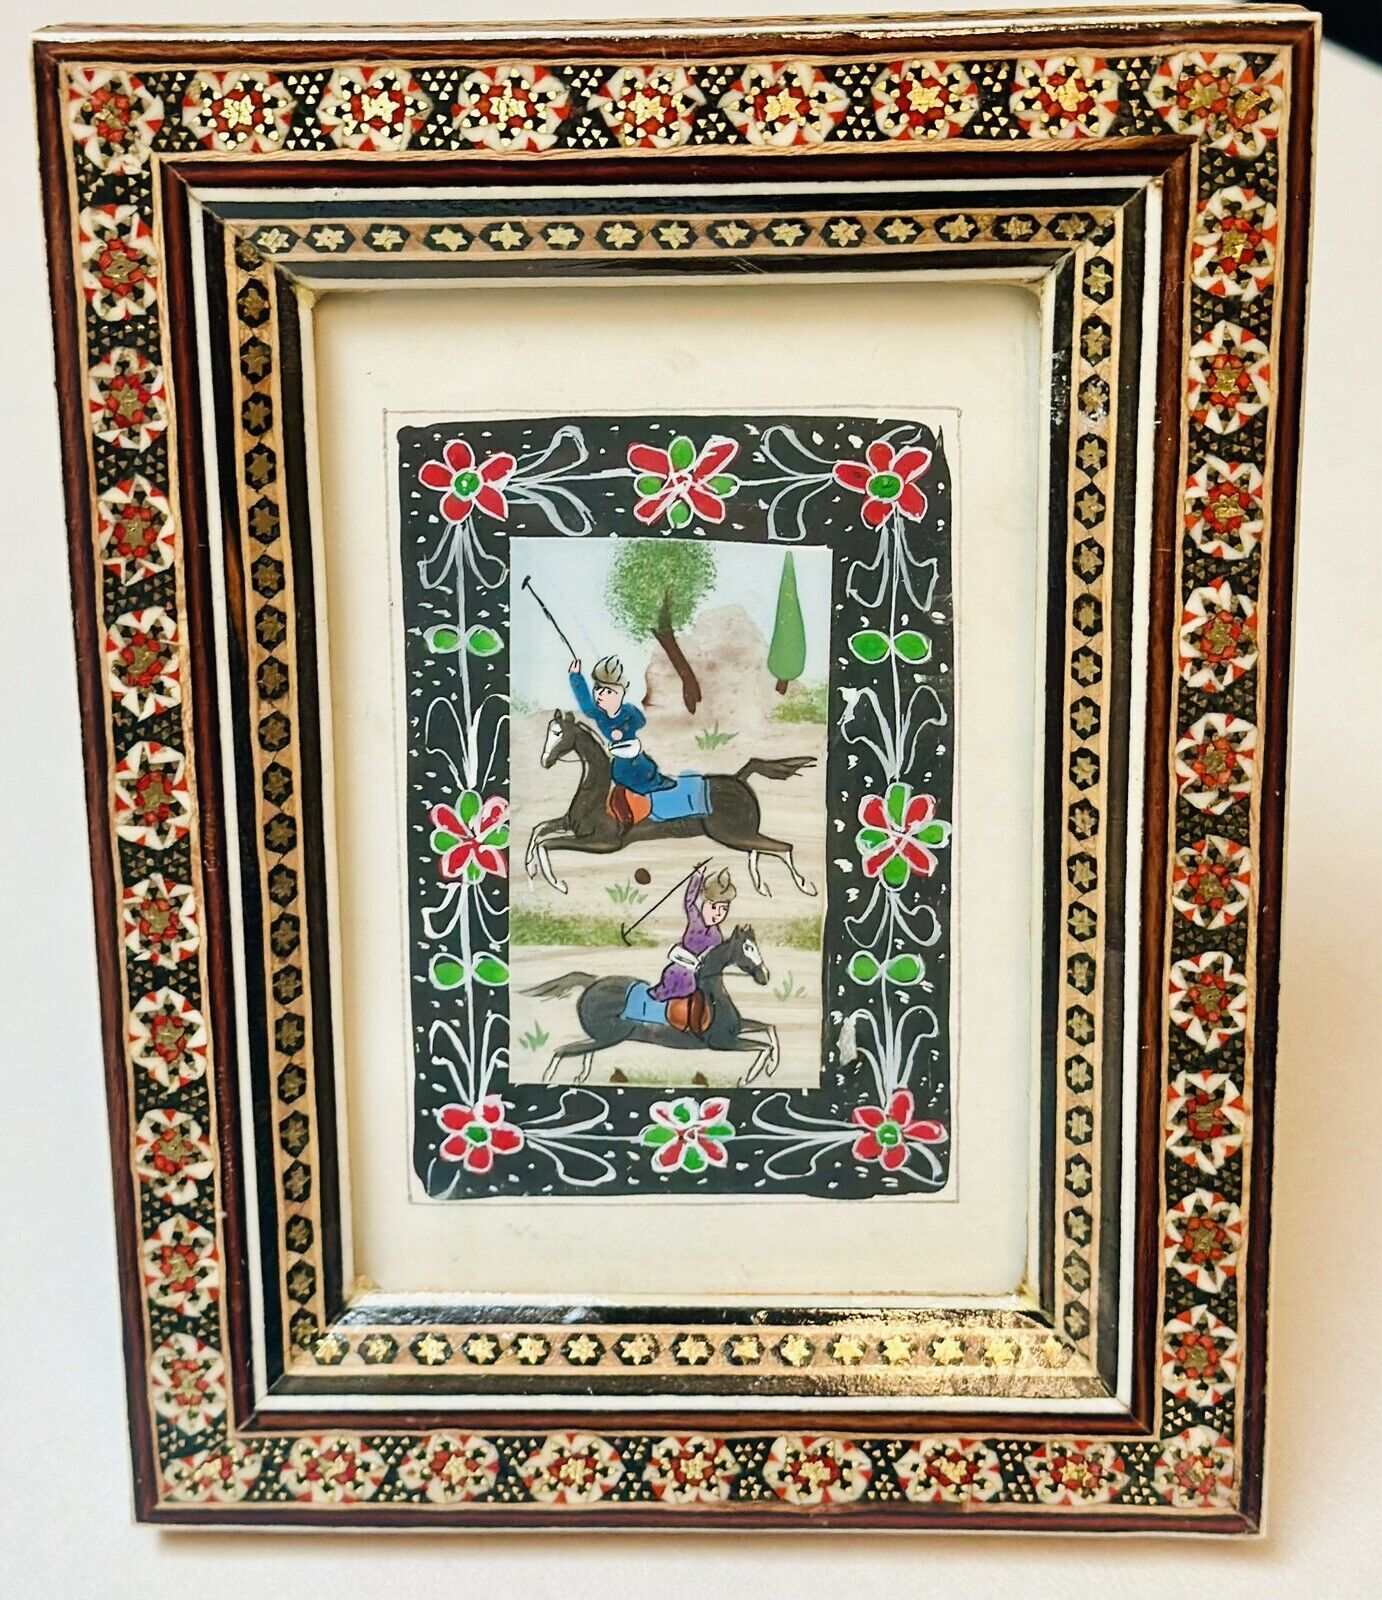 VTG Persian Hand Painted Inlaid Wooden Frame Painting Of Men Hunting On Horses